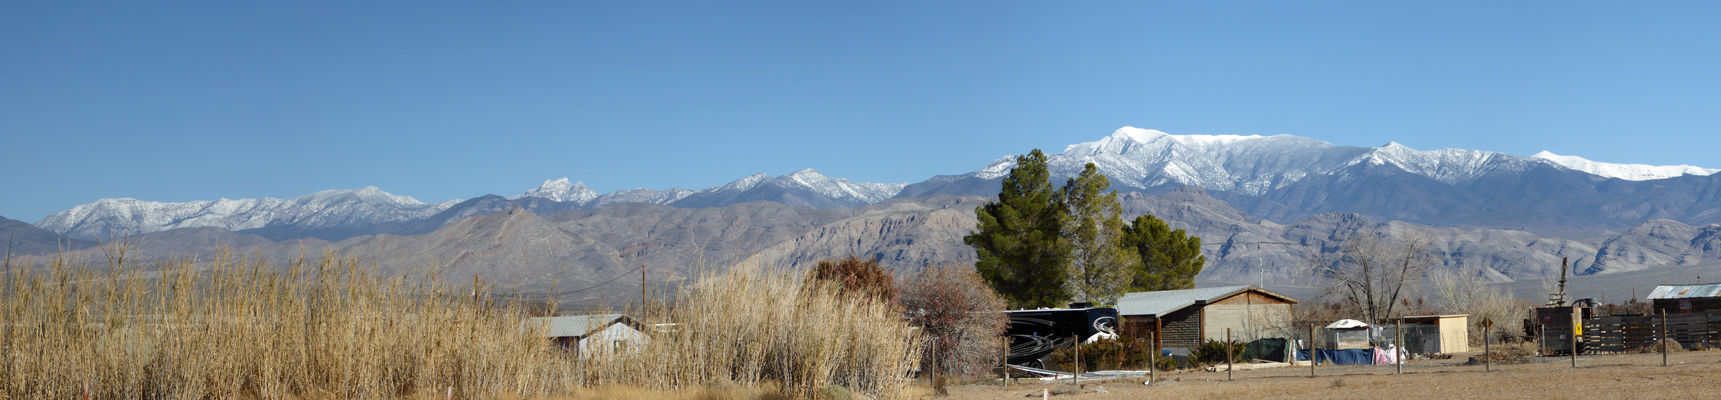 Snow on mountains east of Pahrump NV